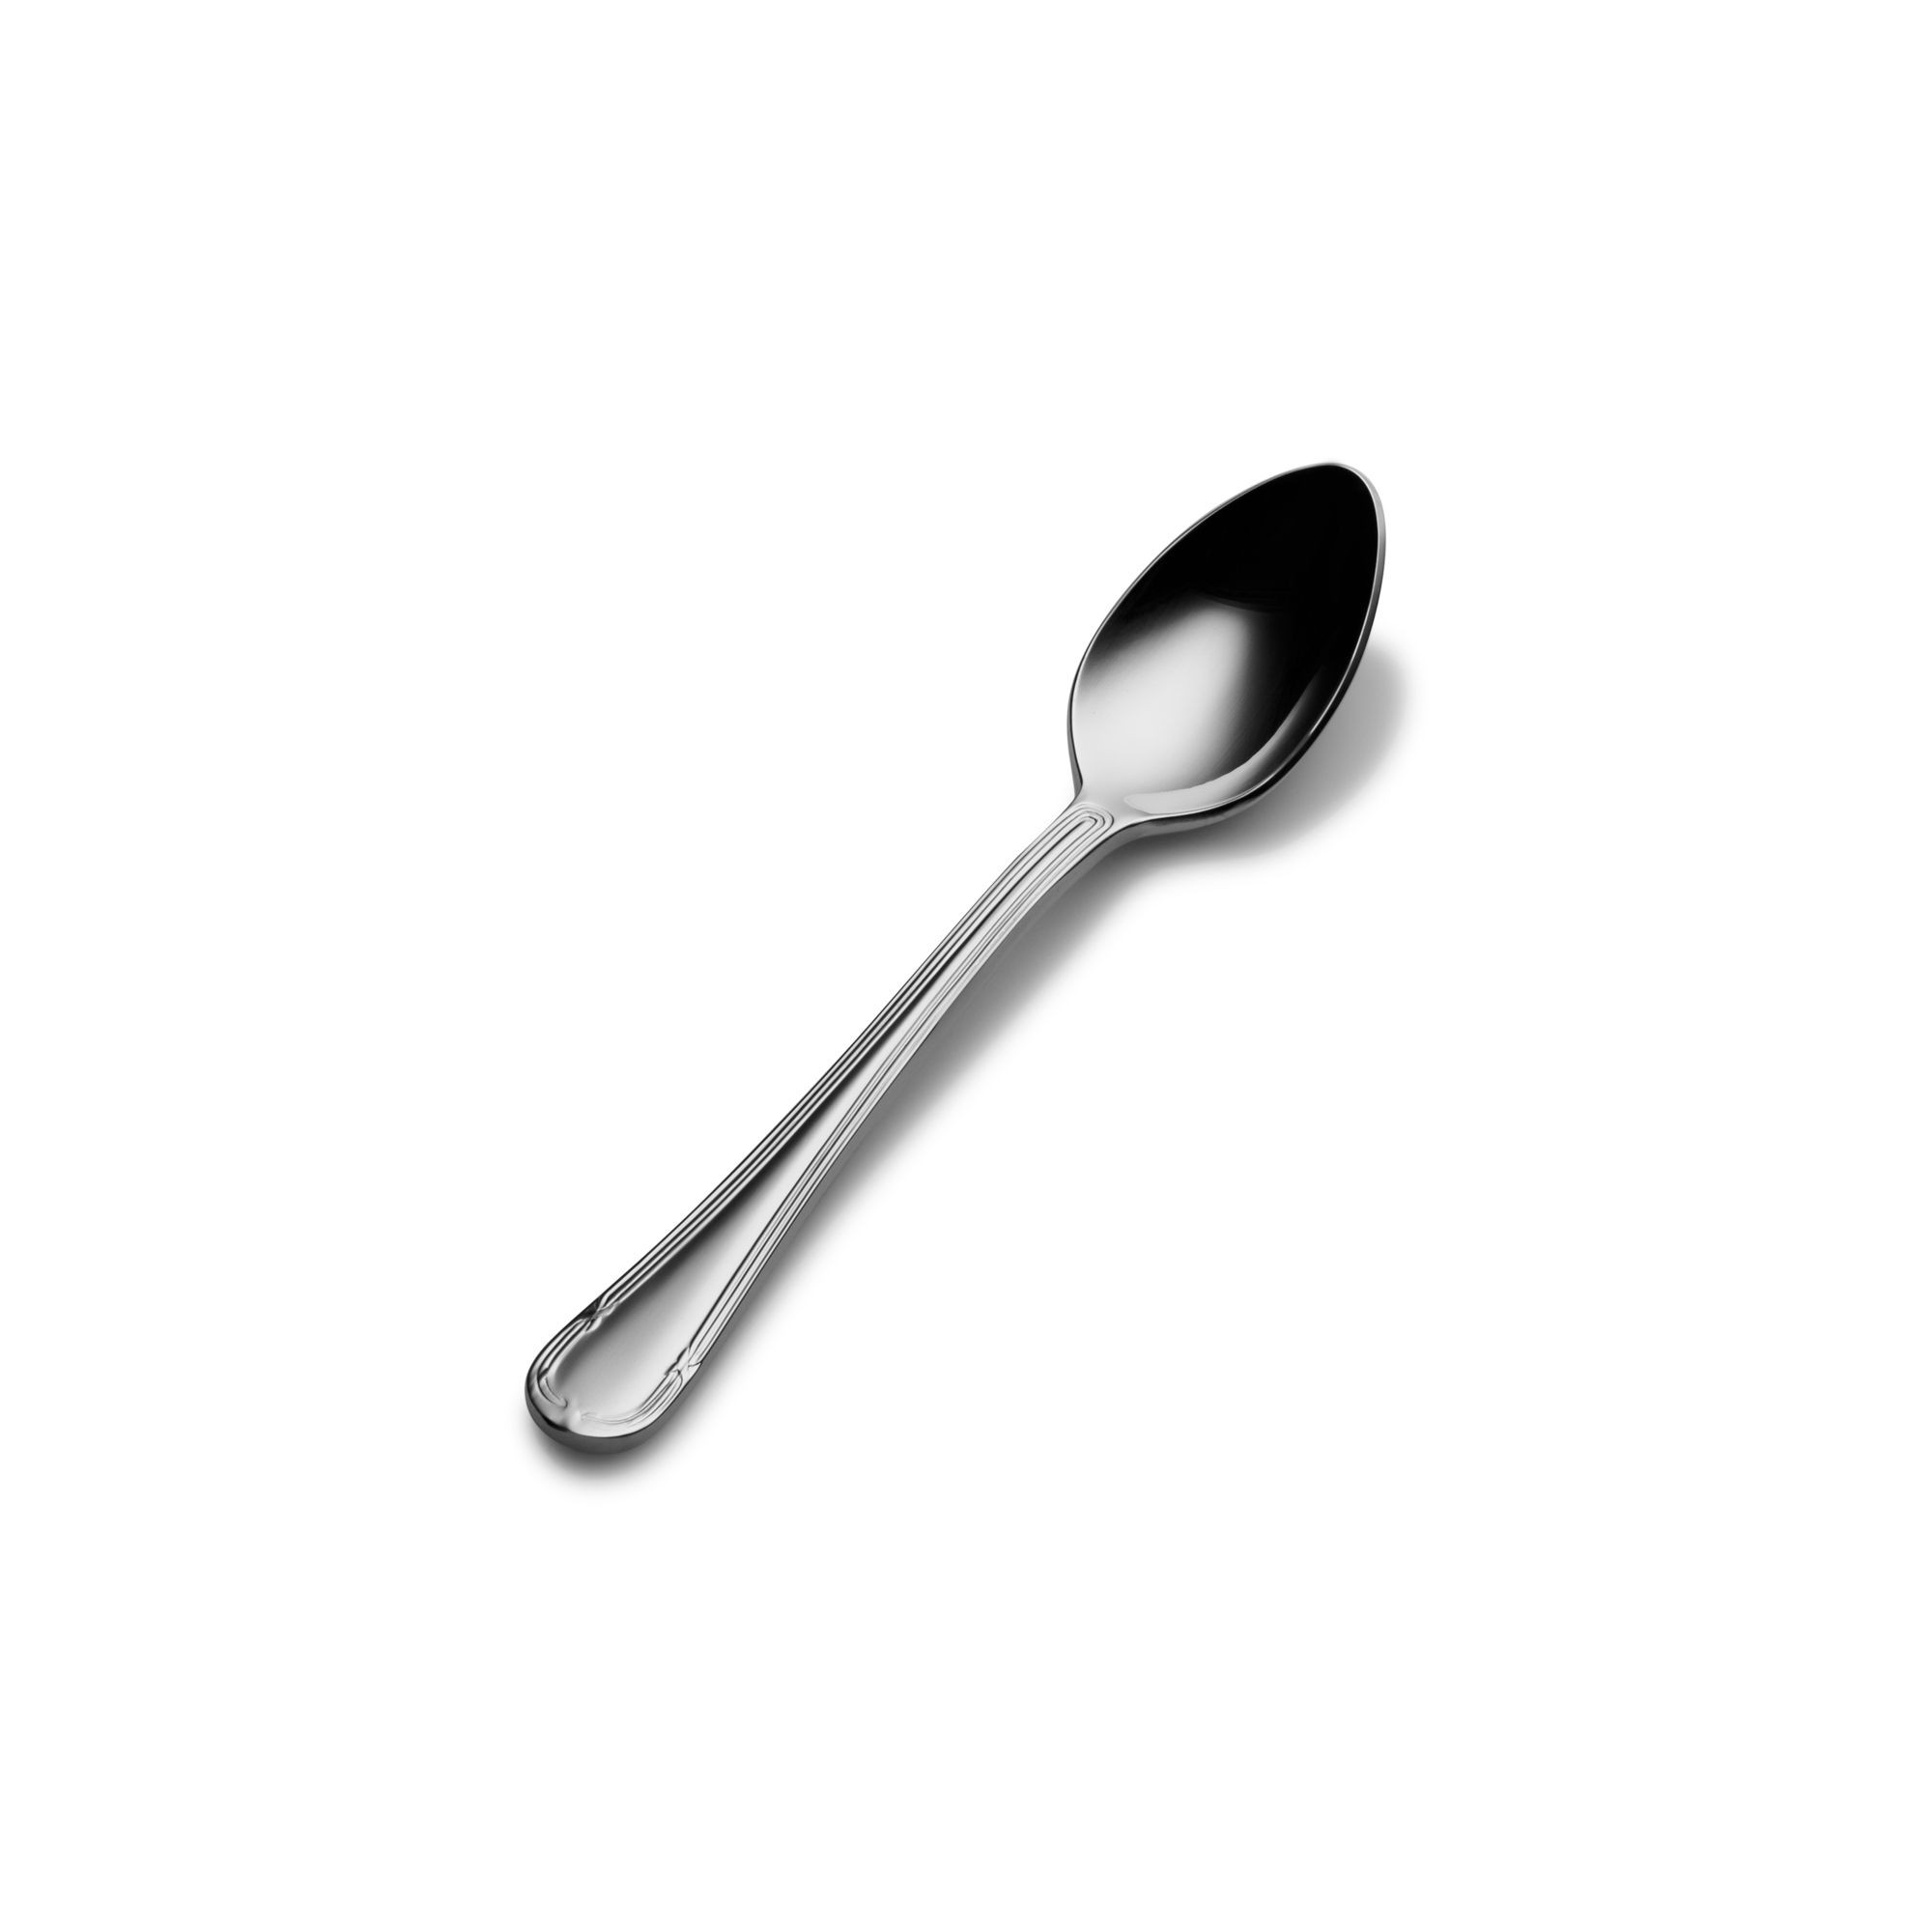 Bon Chef S816 Florence 18/8 Stainless Steel Demitasse Spoon